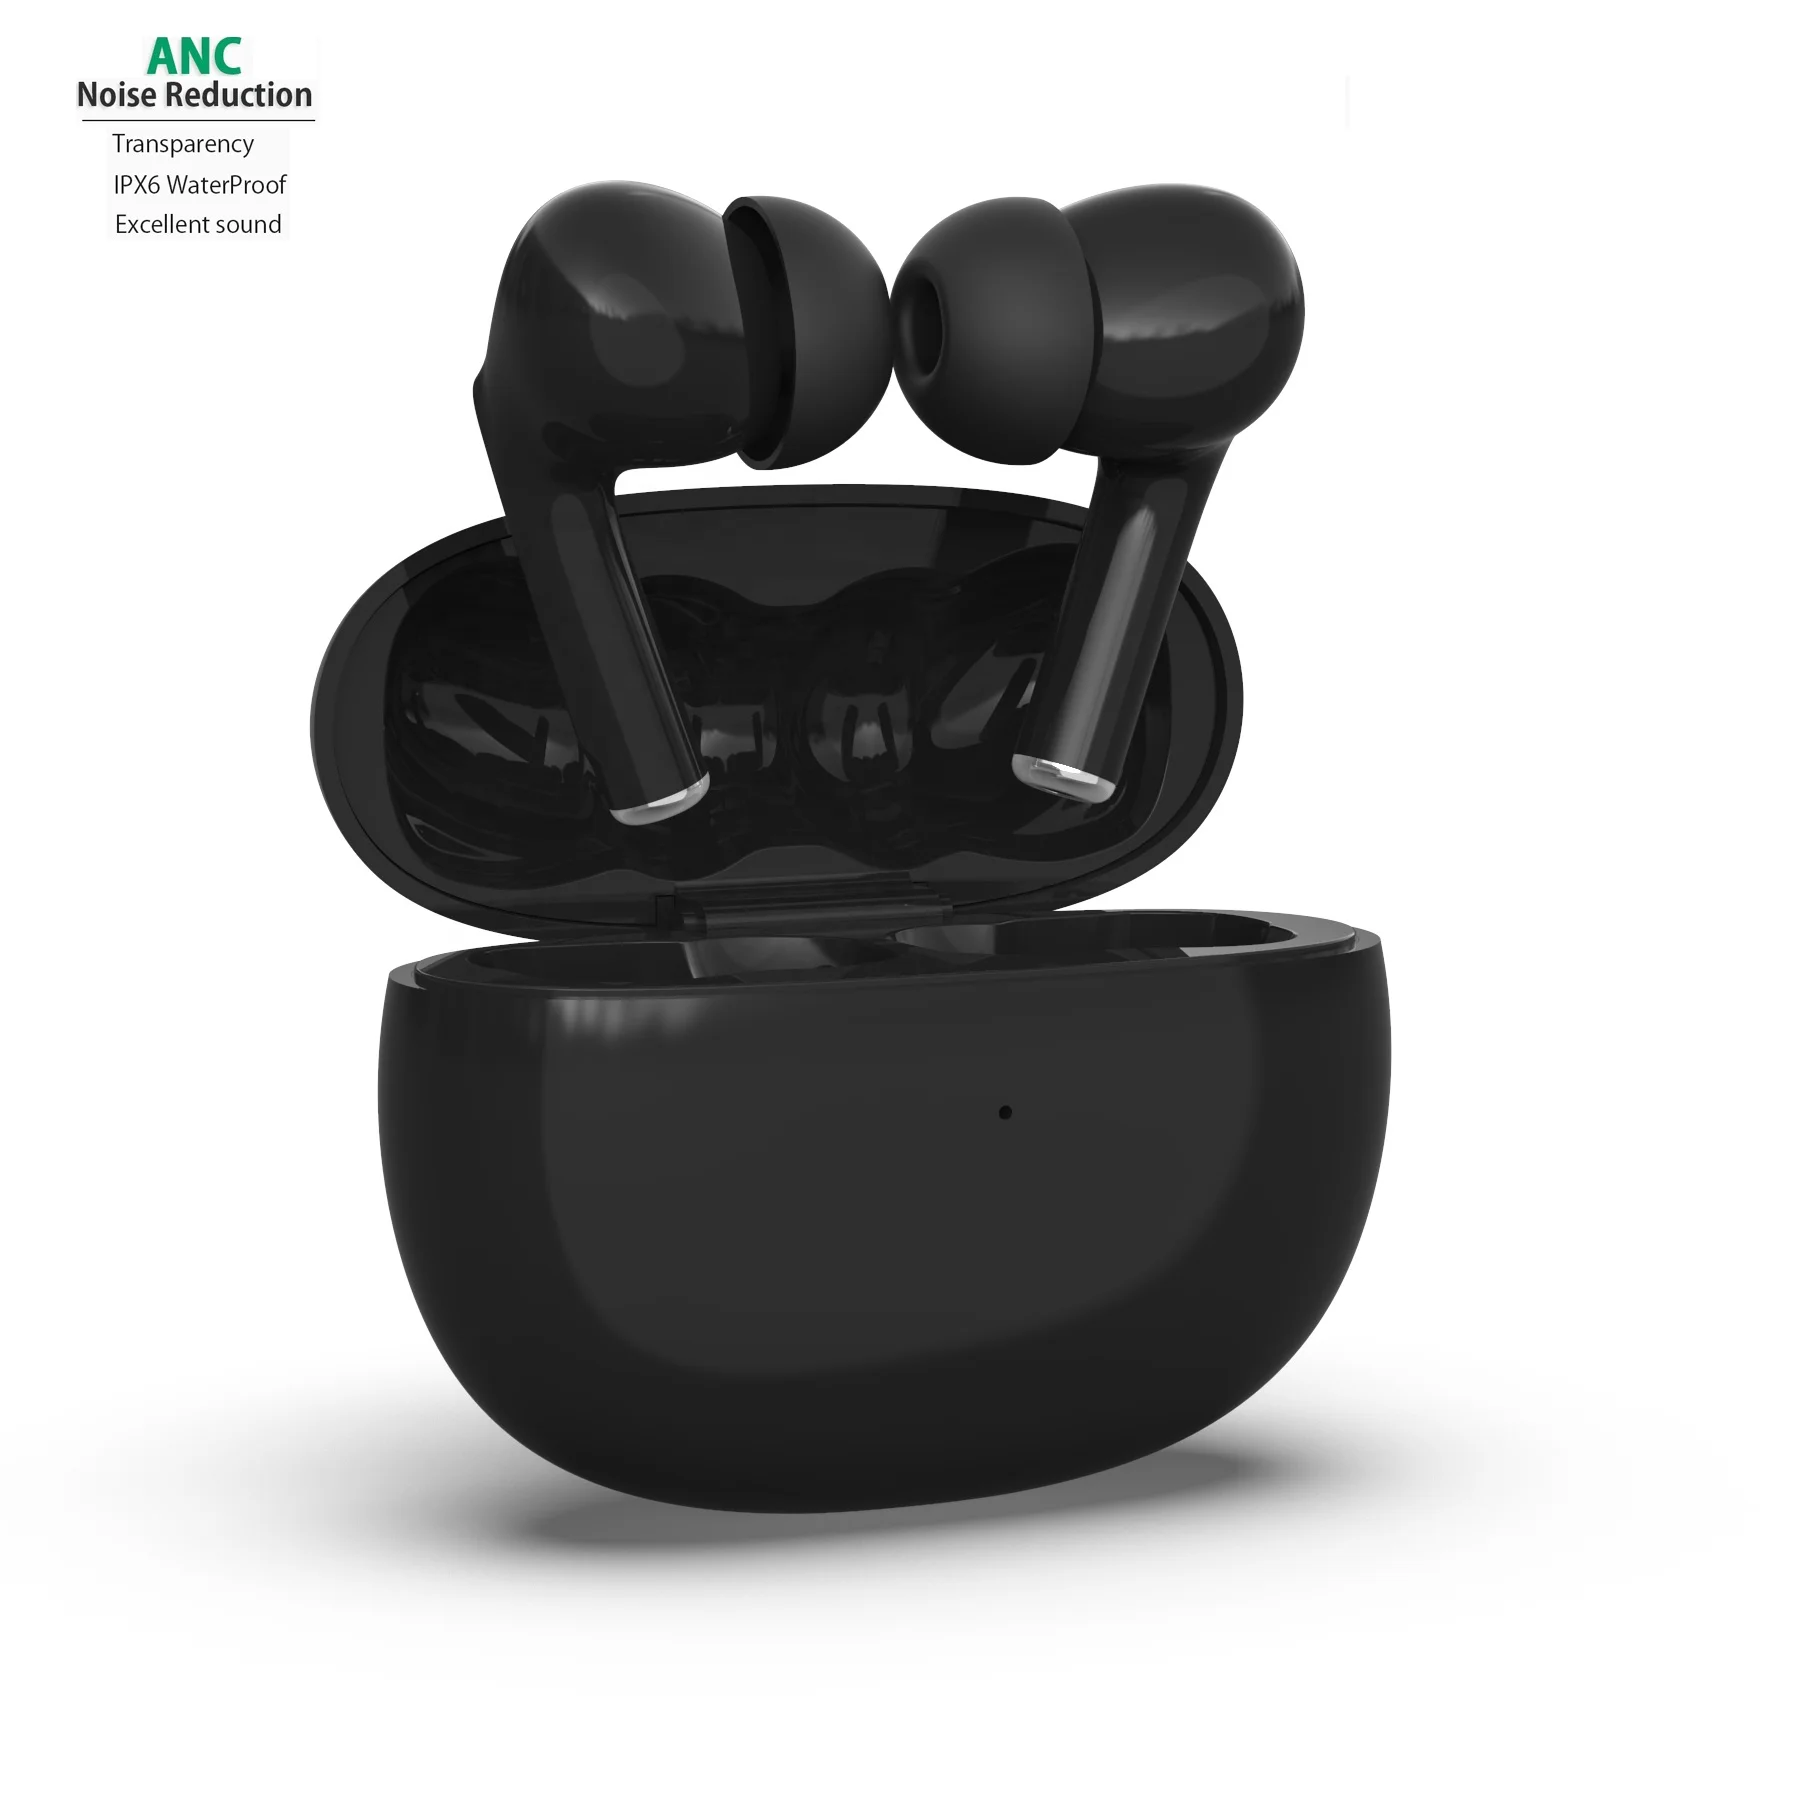 

Hybrid Active Noise Cancelling Wireless Earbuds ANC in-Ear Detection Headphone IPX6 Waterproof Bluetooth 5.1 TWS Stereo Earphone, White black